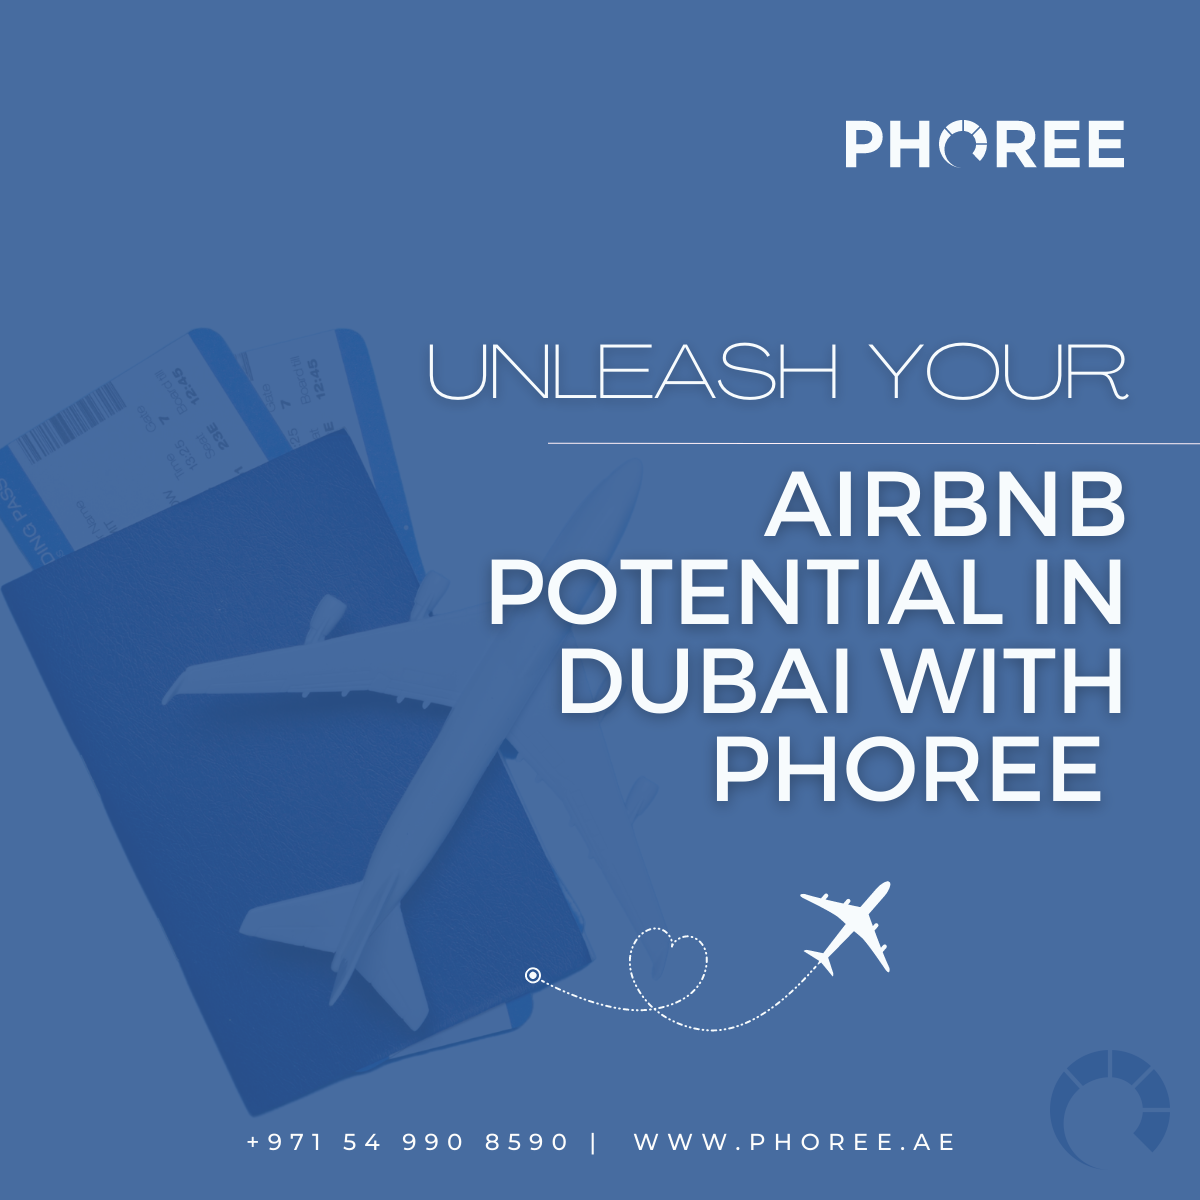 AIRBNB POTENTIAL IN DUBAI WITH PHOREE